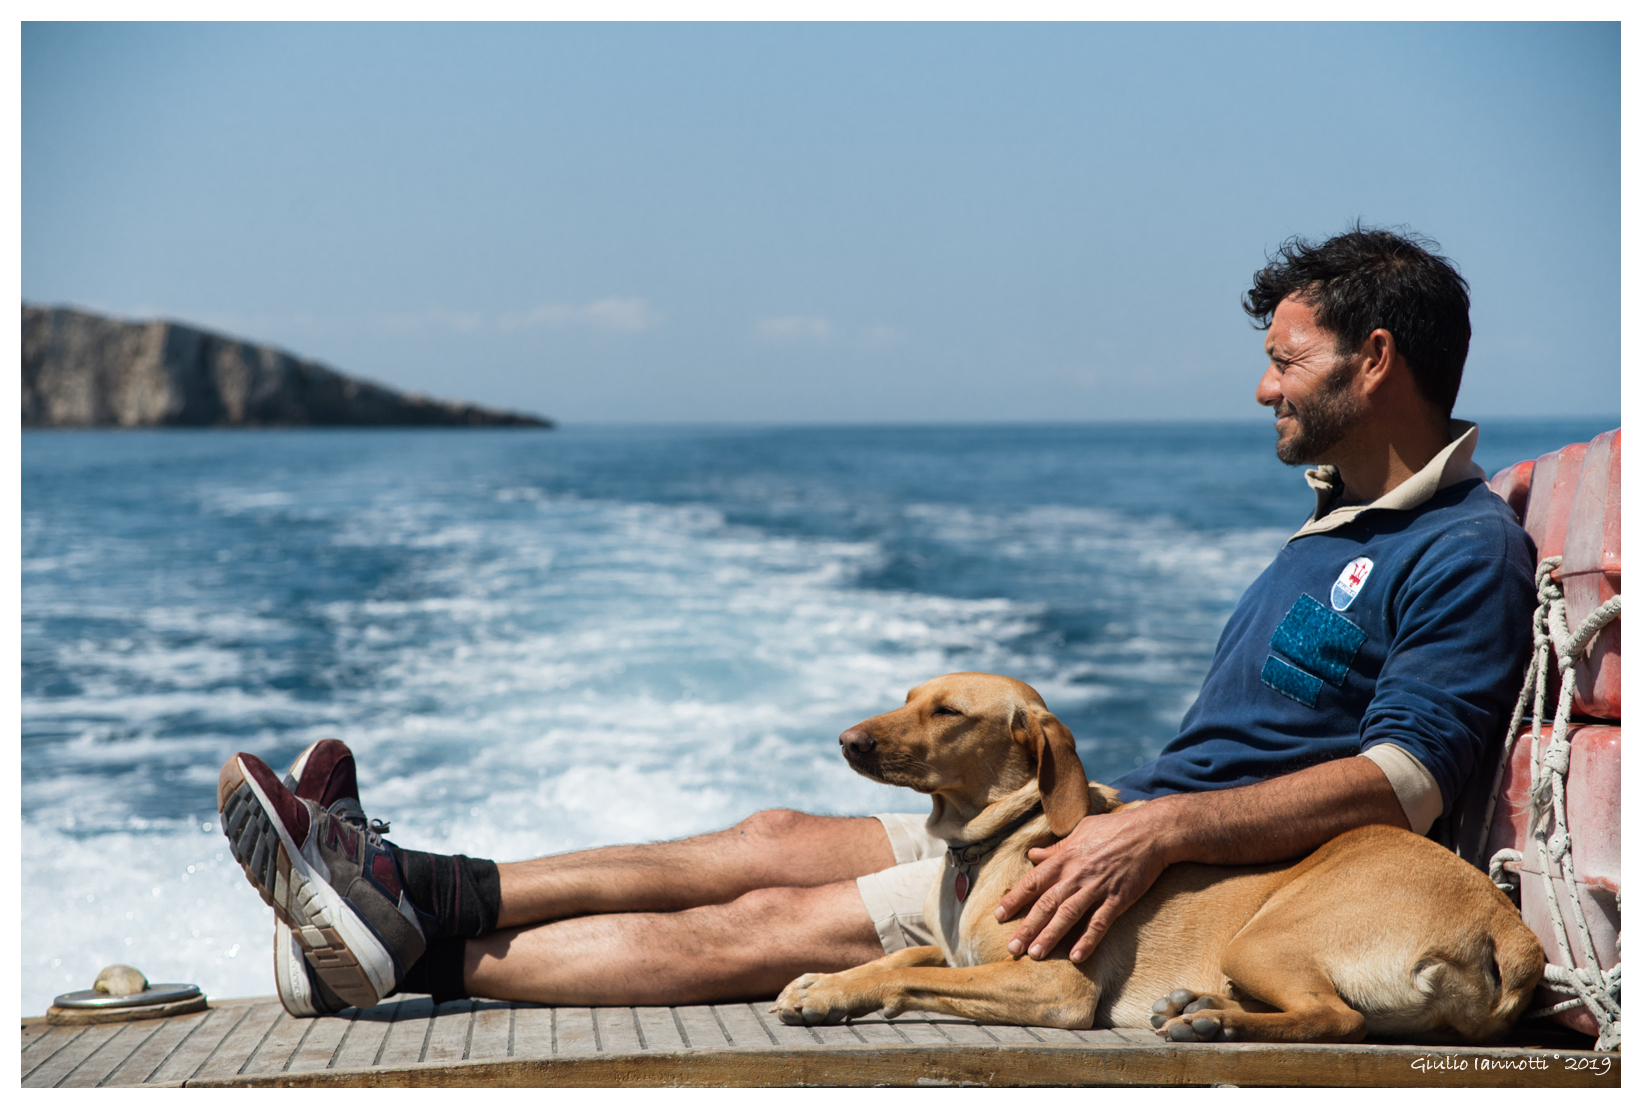 The man, his dog and their sea...